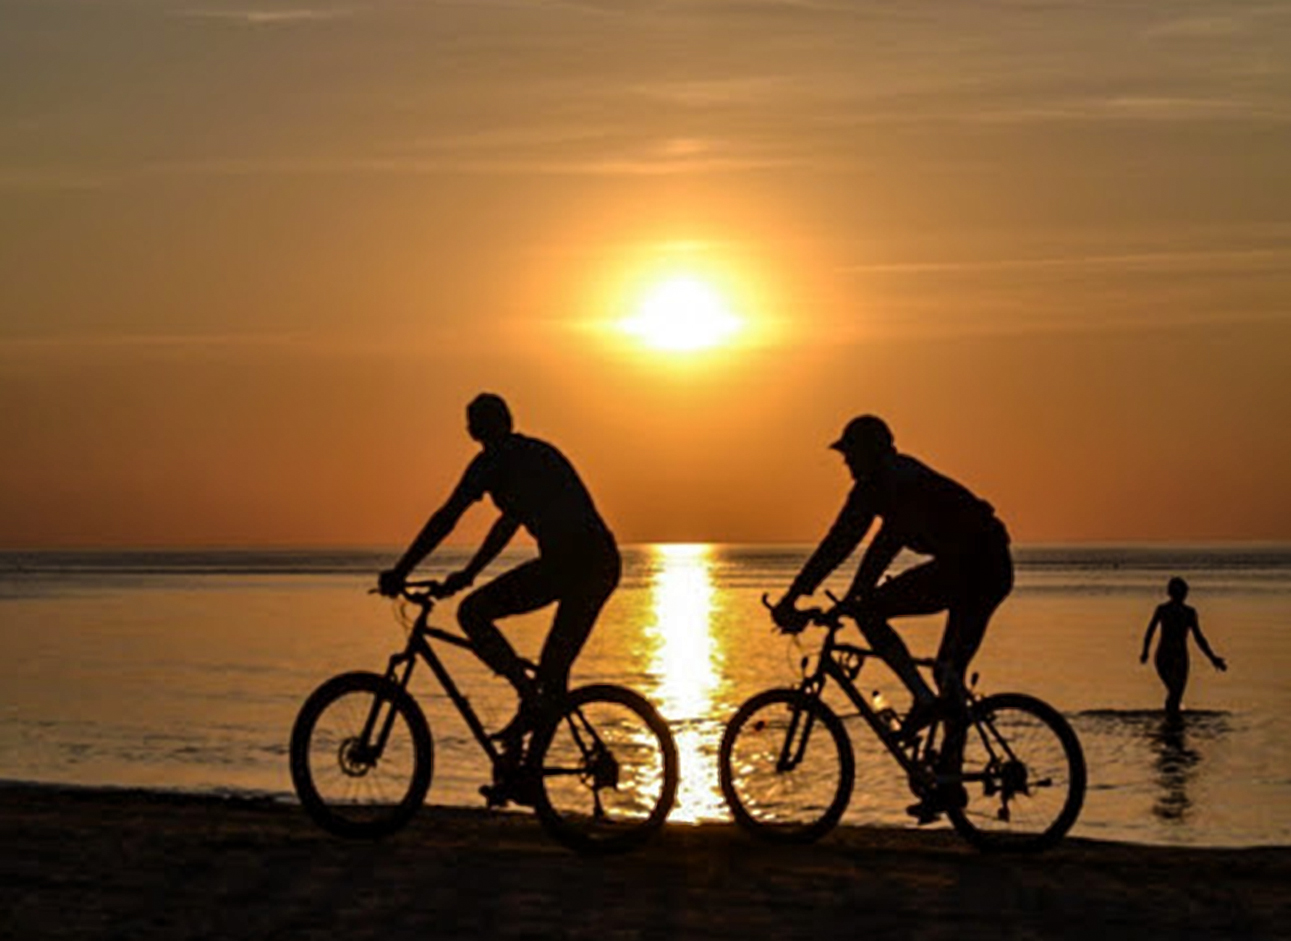 Bicycle Tours - Explore scenic routes and enjoy adventurous trips on guided bicycle tours